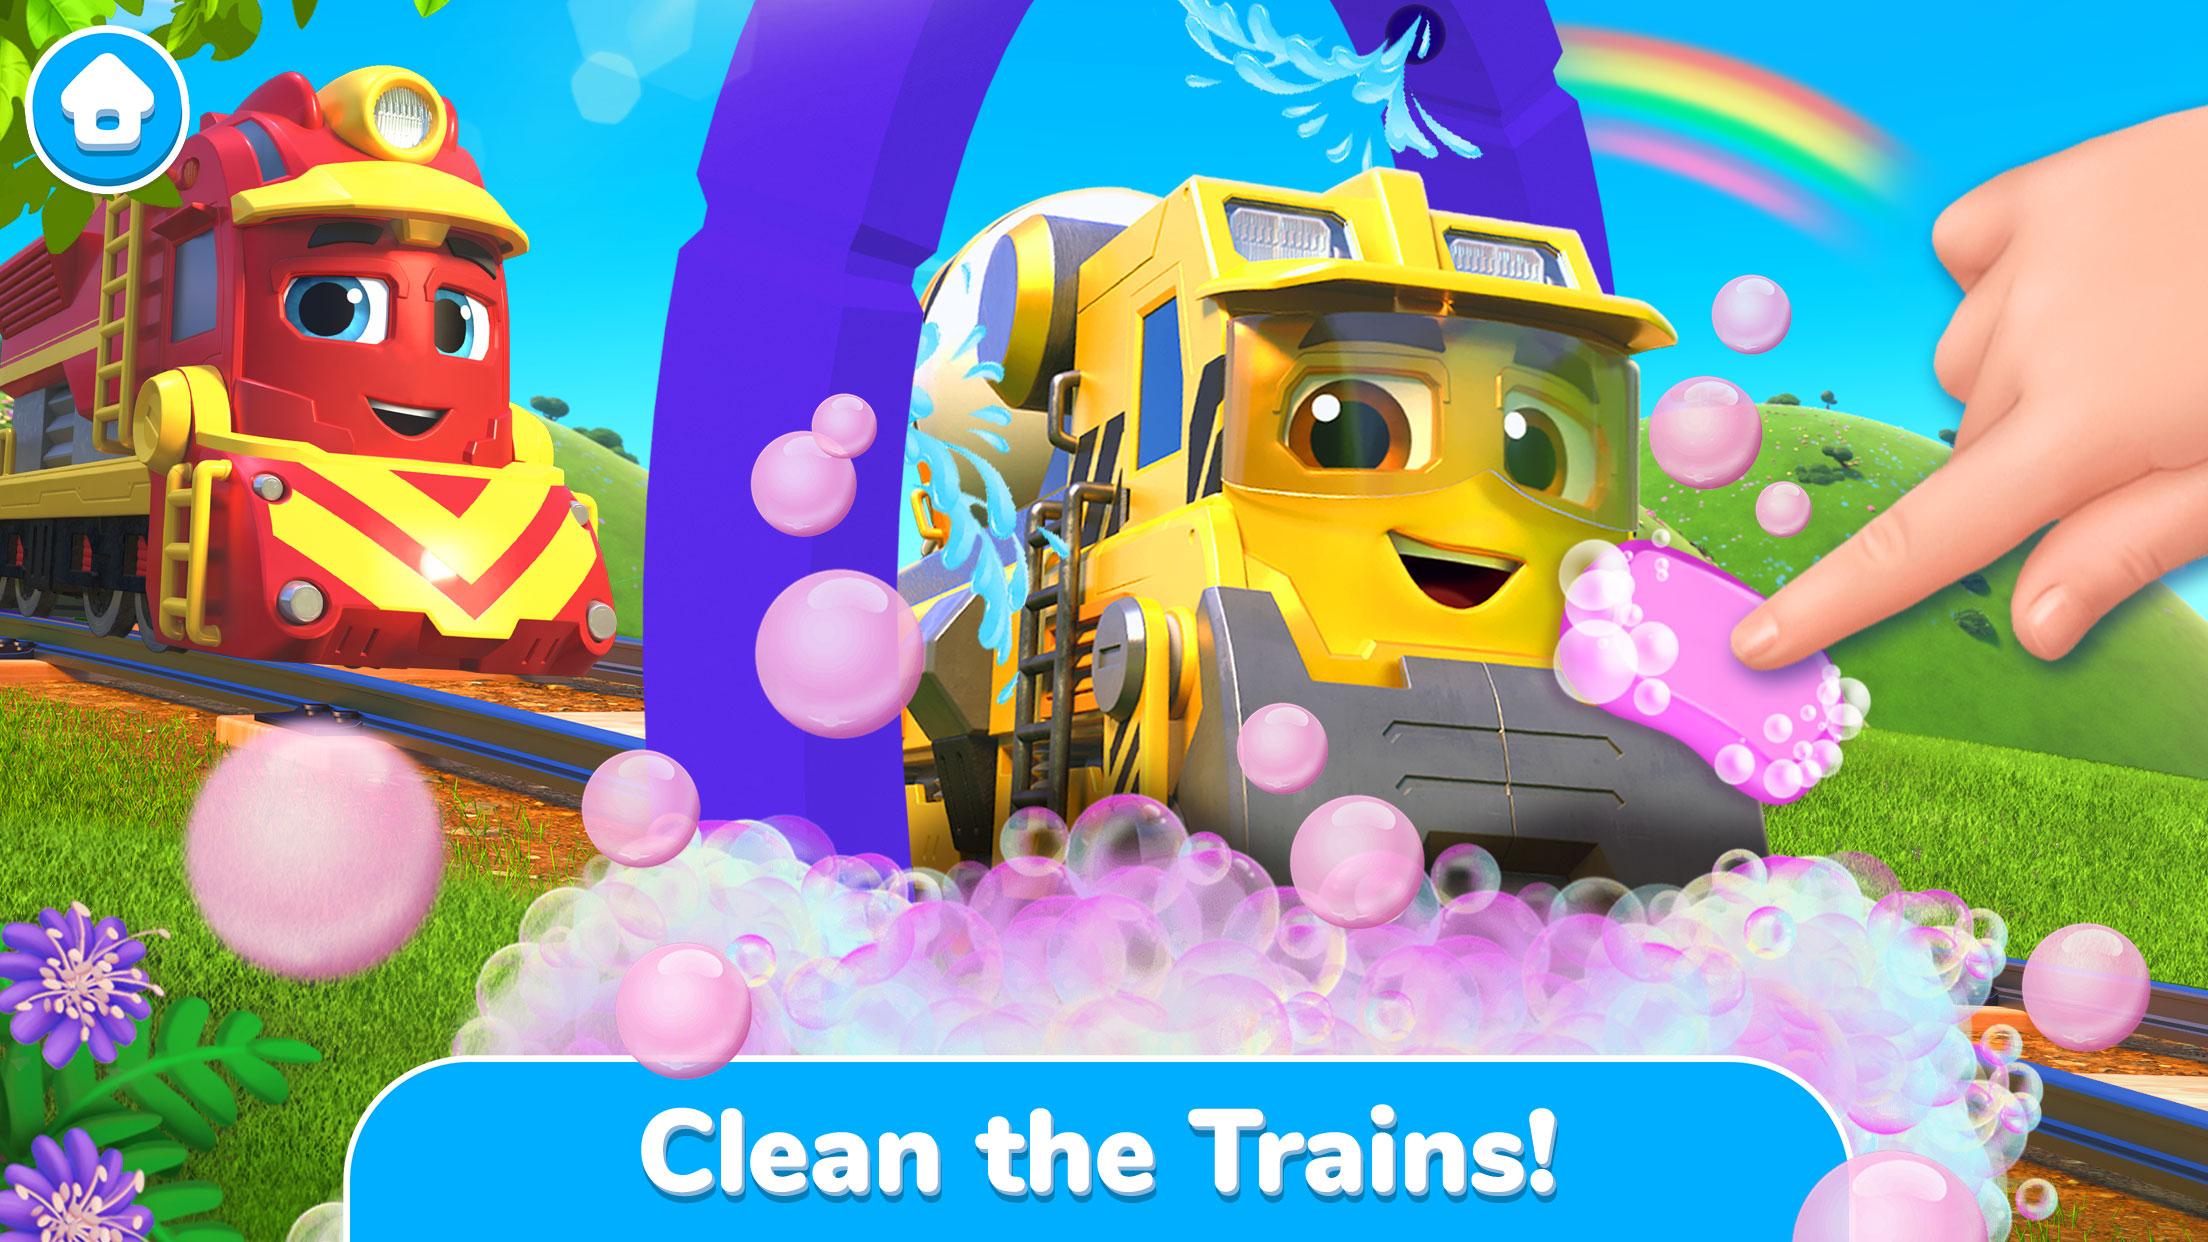 Mighty Express Play & Learn with Train Friends 1.3.1 Screenshot 2